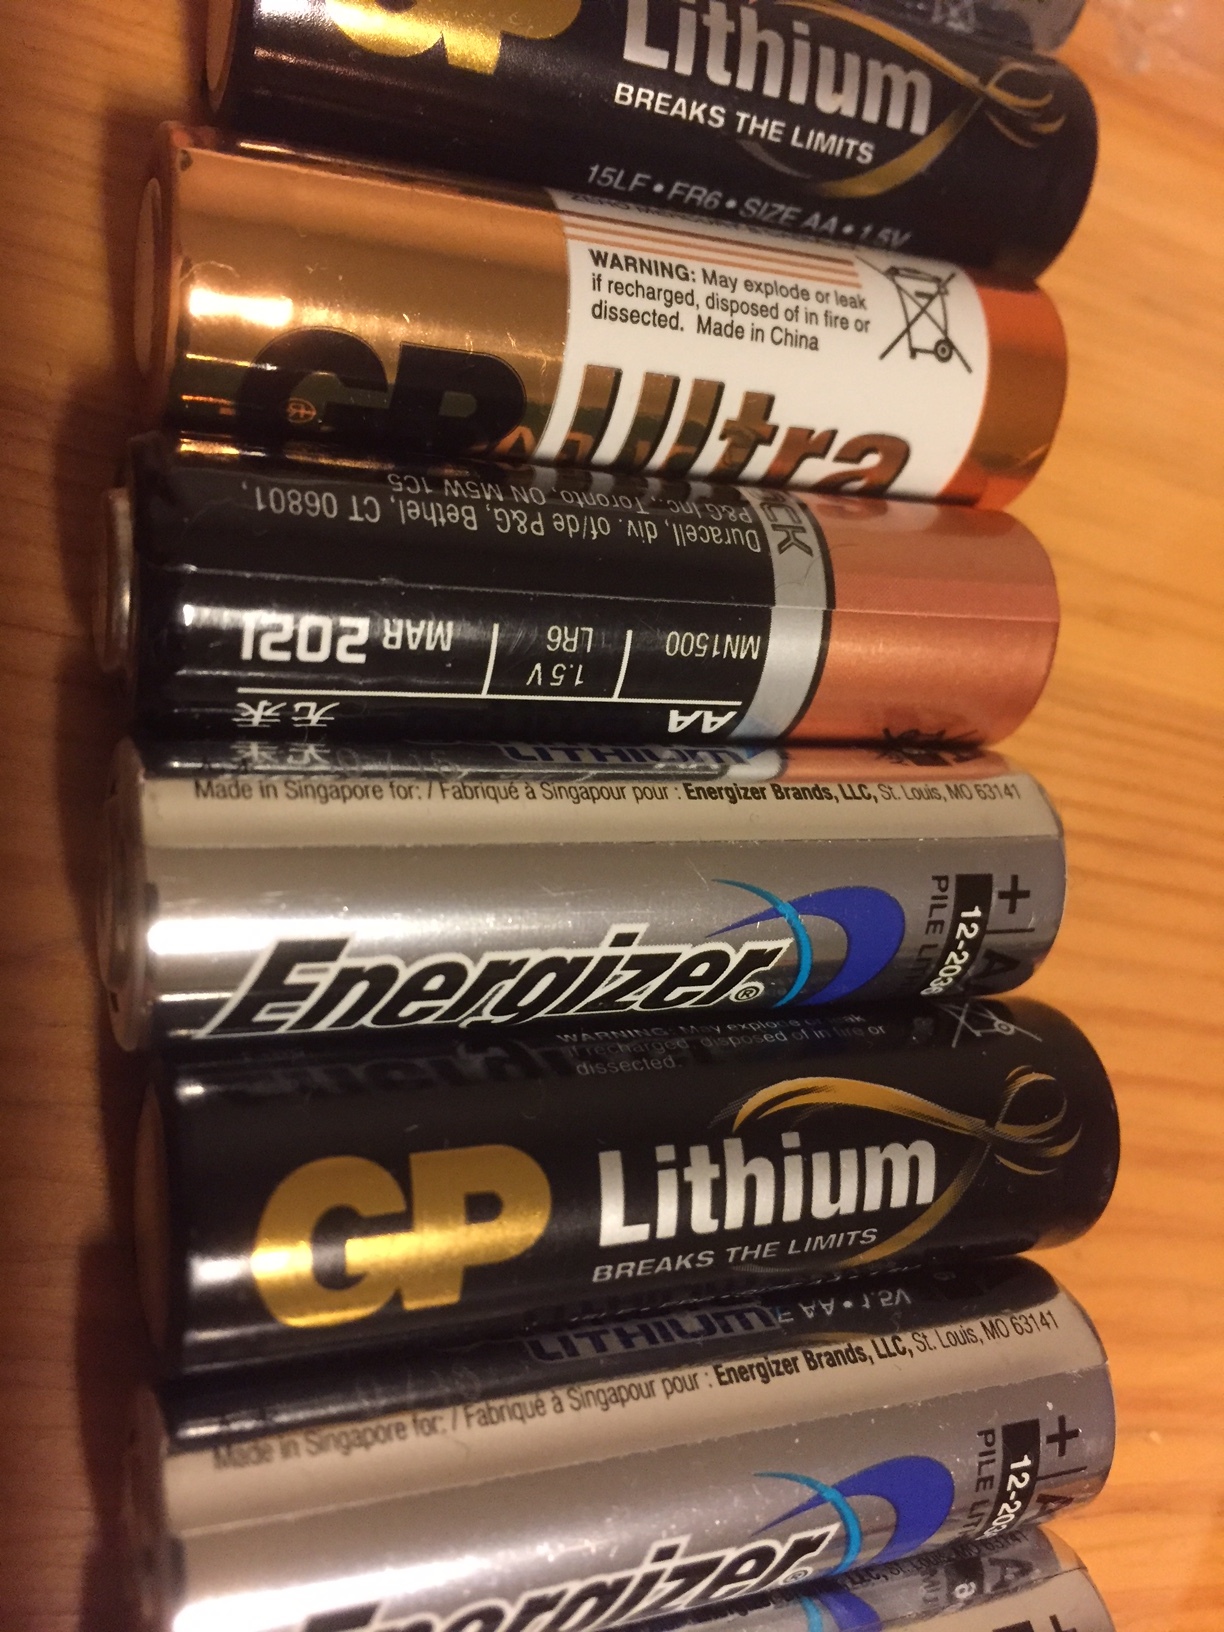 Test of Energizer Ultimate Lithium AA